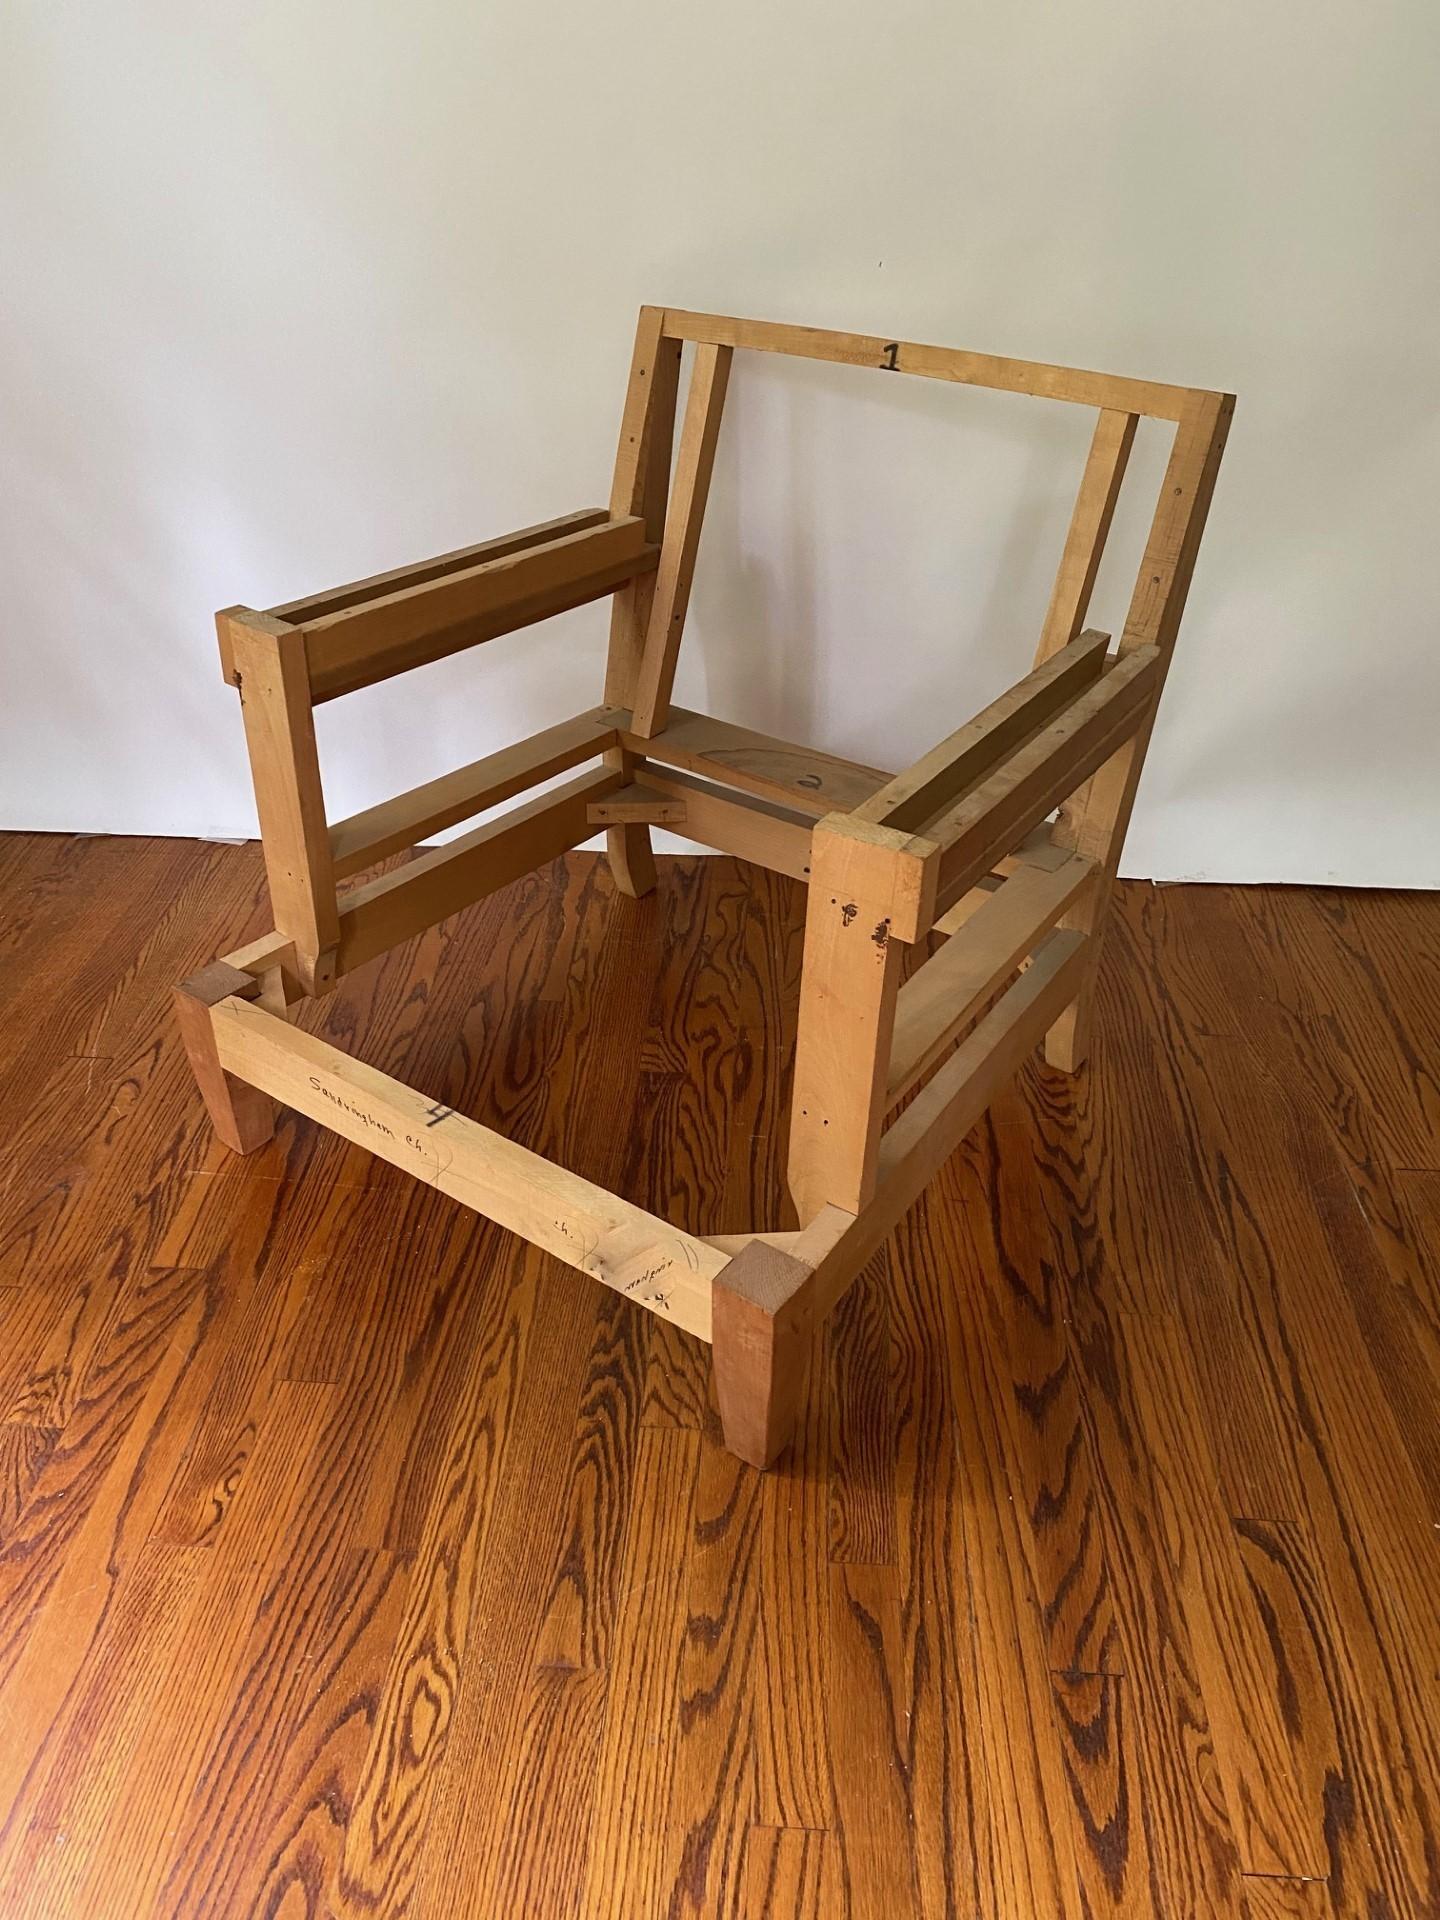 This new kiln-dried Maple Lawson style lounge chair frame with Mahogany square tapered front legs can sit comfortably in any style decor.
This stylish frame with a straight back and square arms is very study with its corner blocks.

Two (2) frames